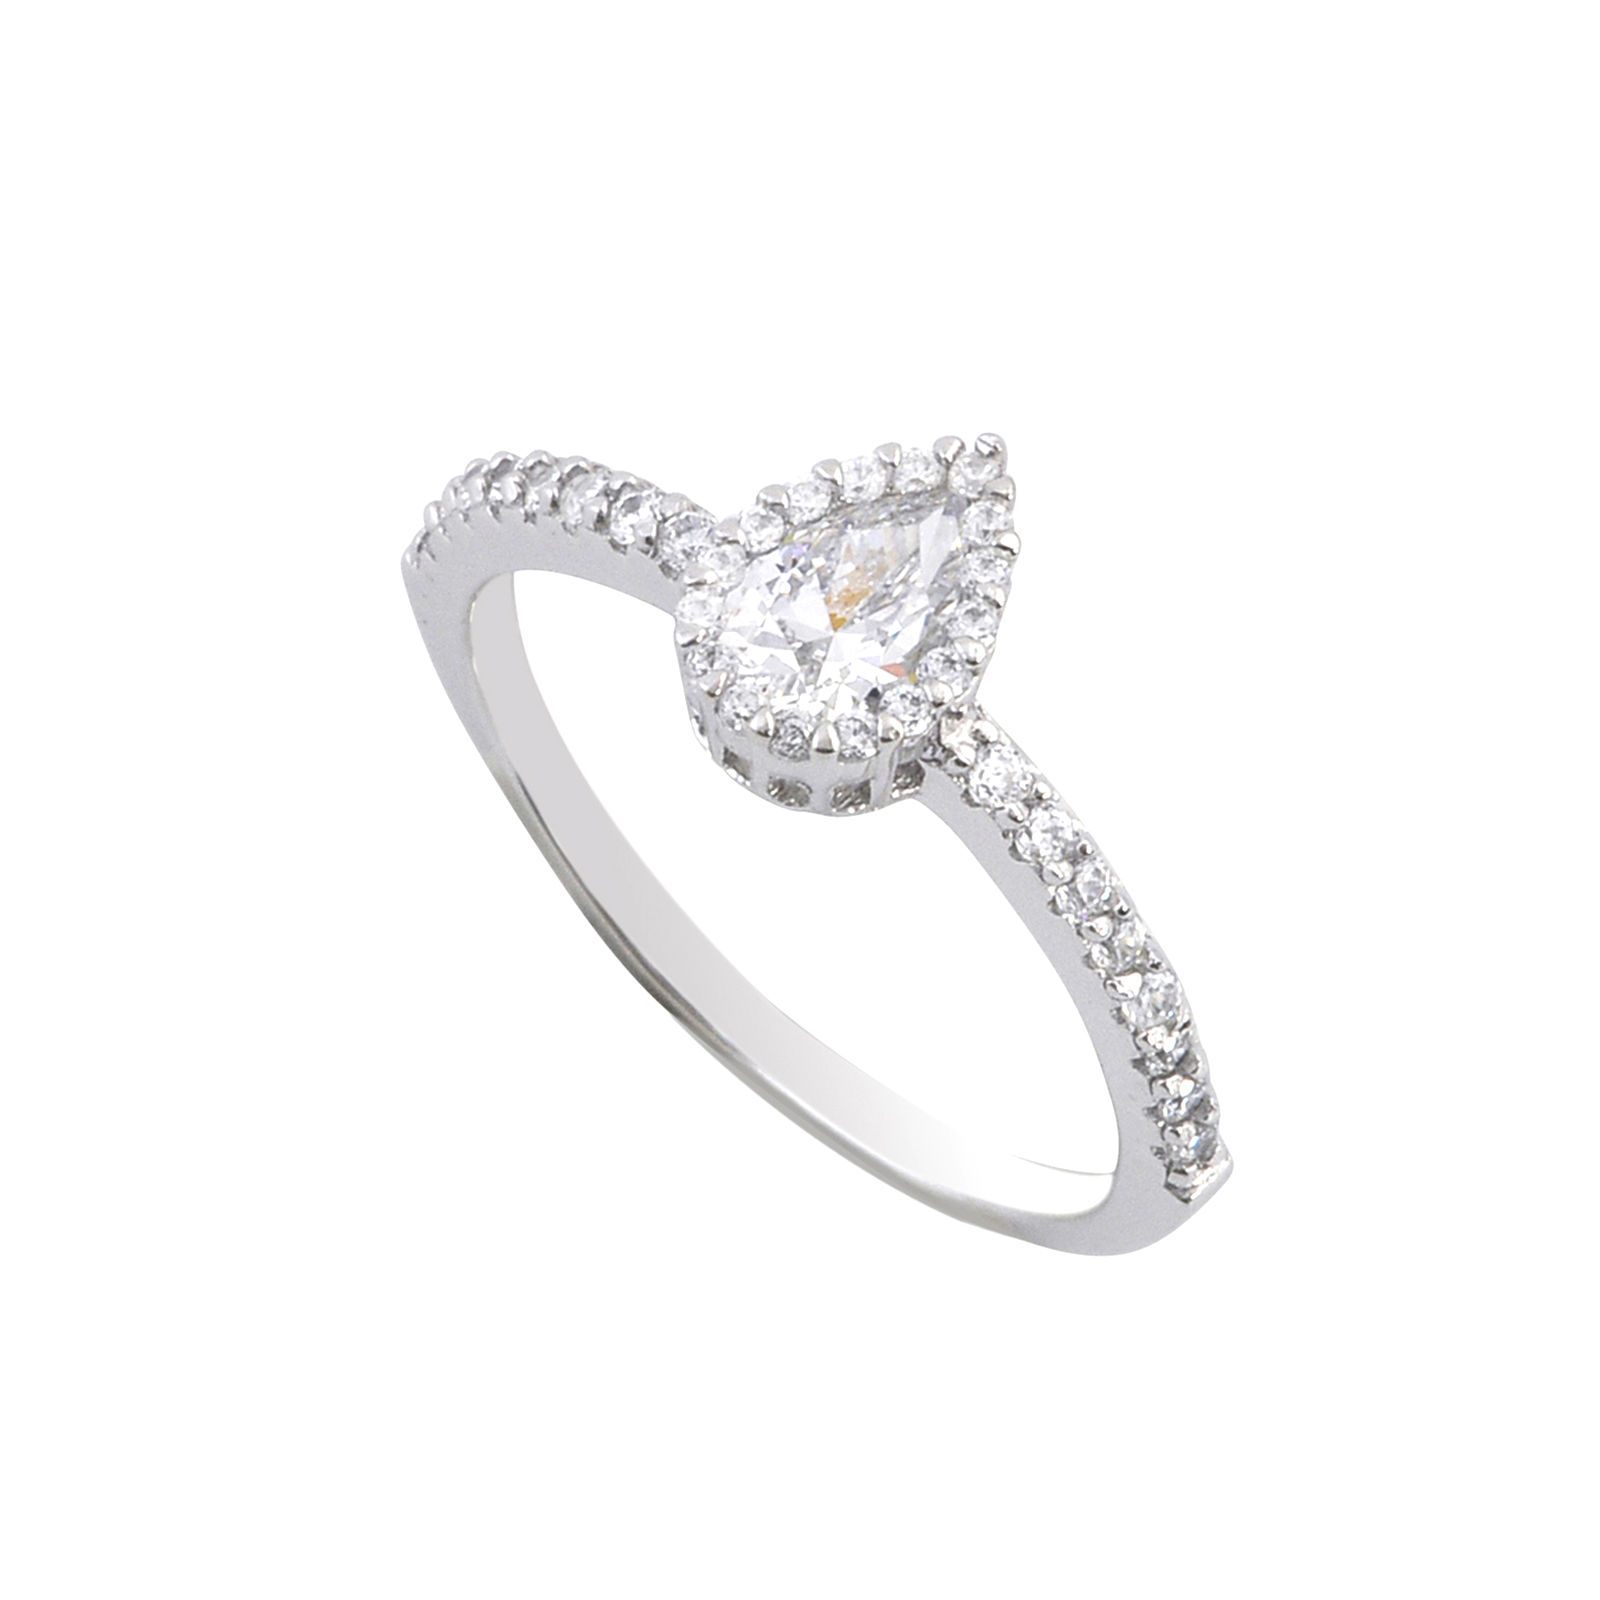 Jewelryland - Sterling silver pear-shaped cz ring 1ct